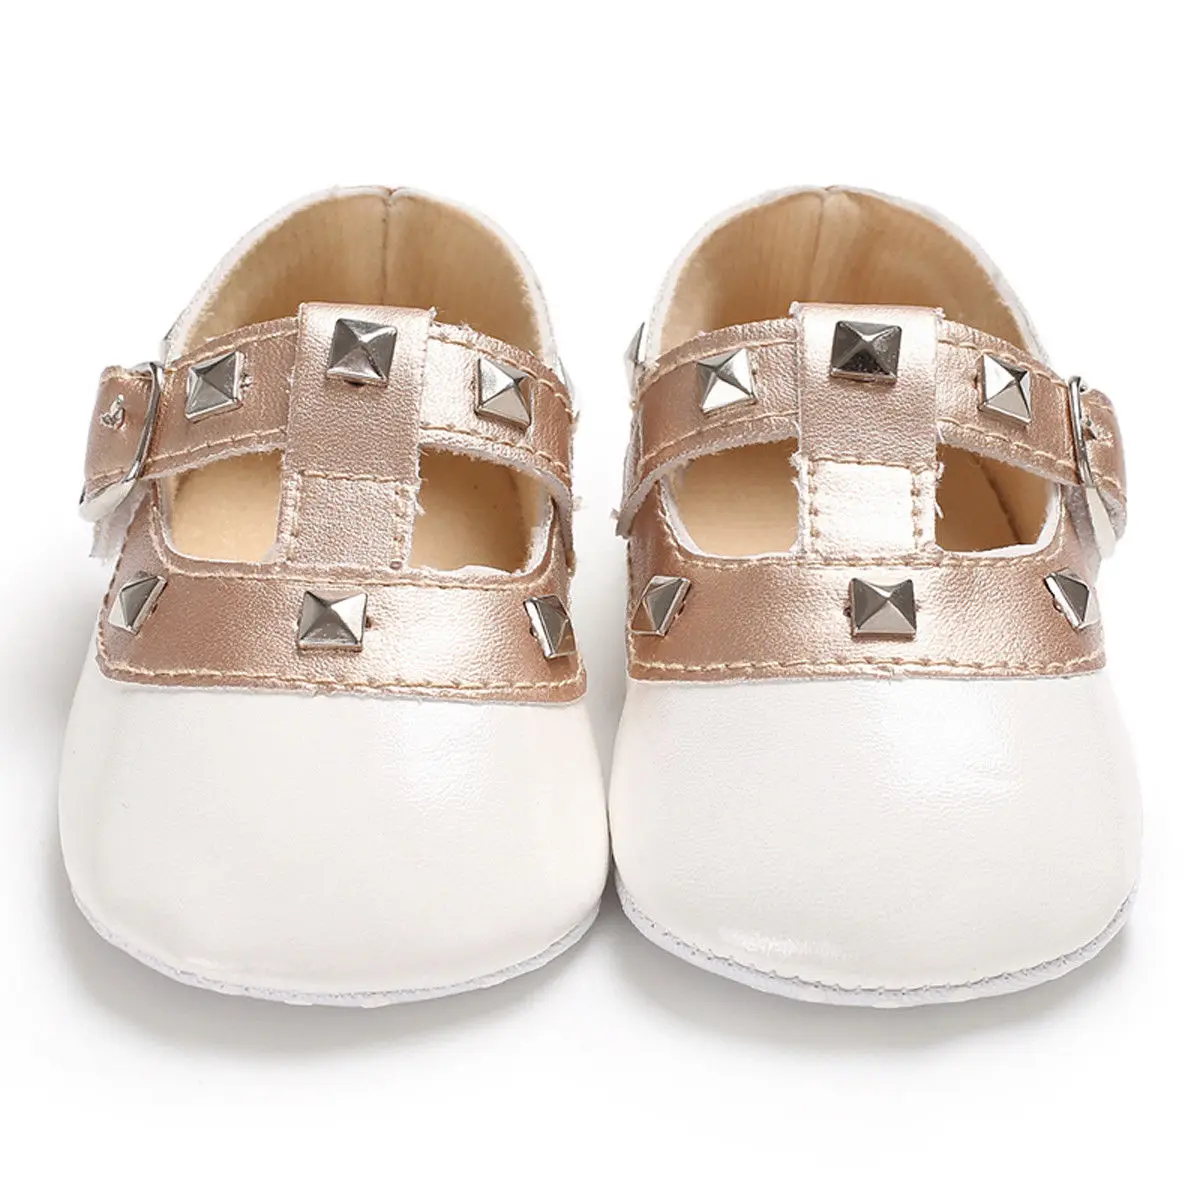 Newborn Baby Girls Bow Princess Shoes Soft Sole Crib Leather Solid Buckle Strap Flat with Heel Baby Shoes Toddler Fashion Shoes images - 6